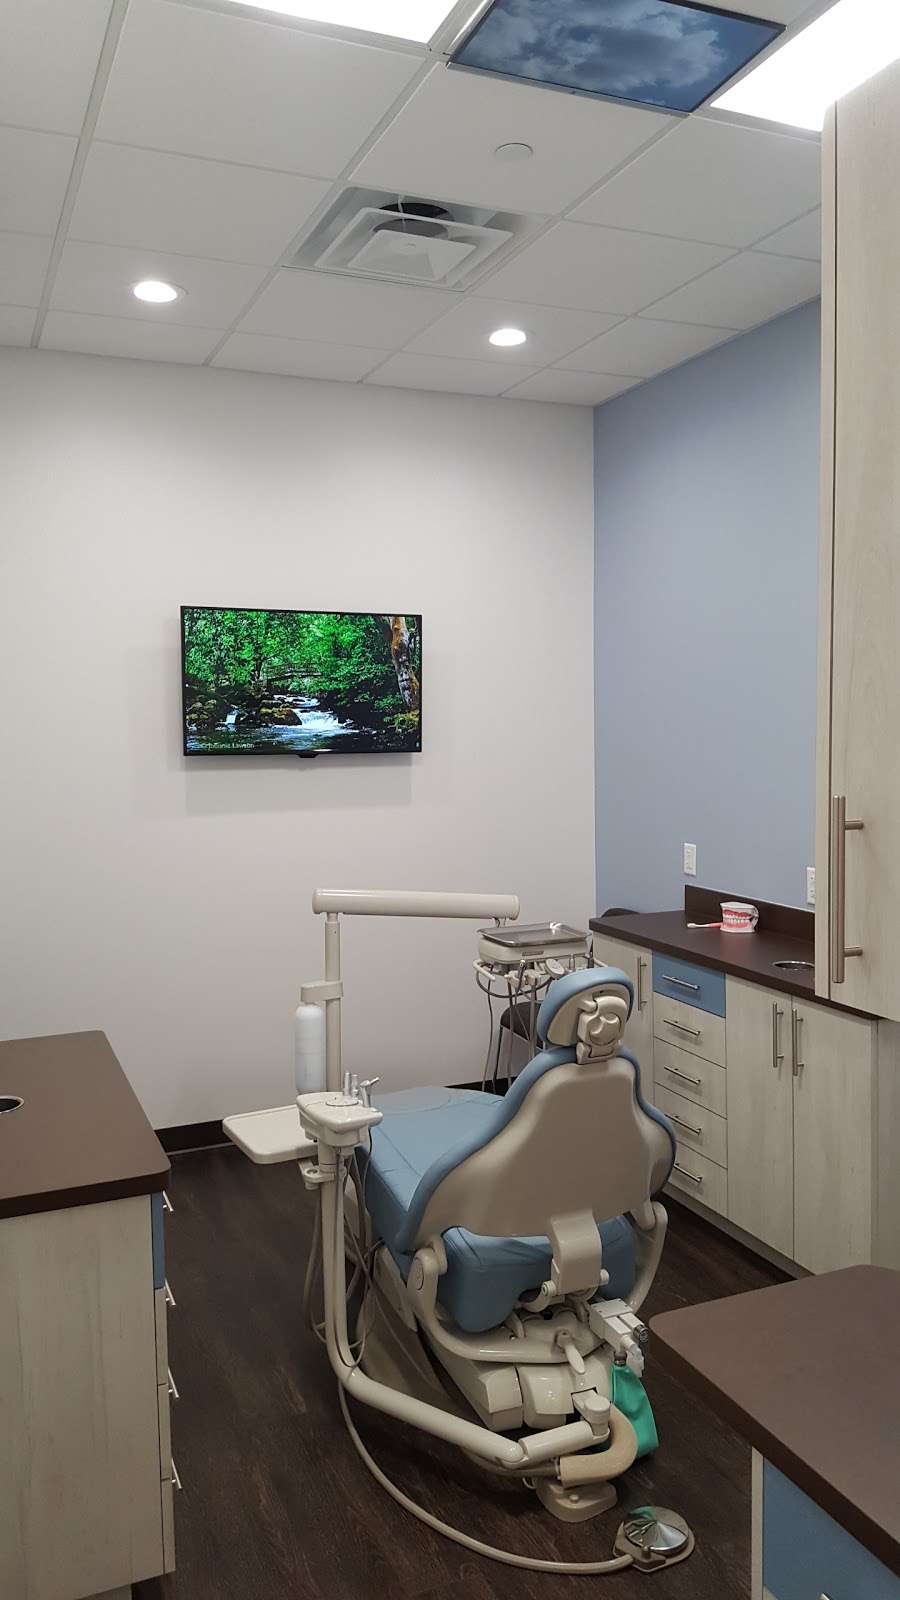 McEwen Family Dentistry | 20212 Champion Forest Dr suite 400, Spring, TX 77379, USA | Phone: (281) 303-5414